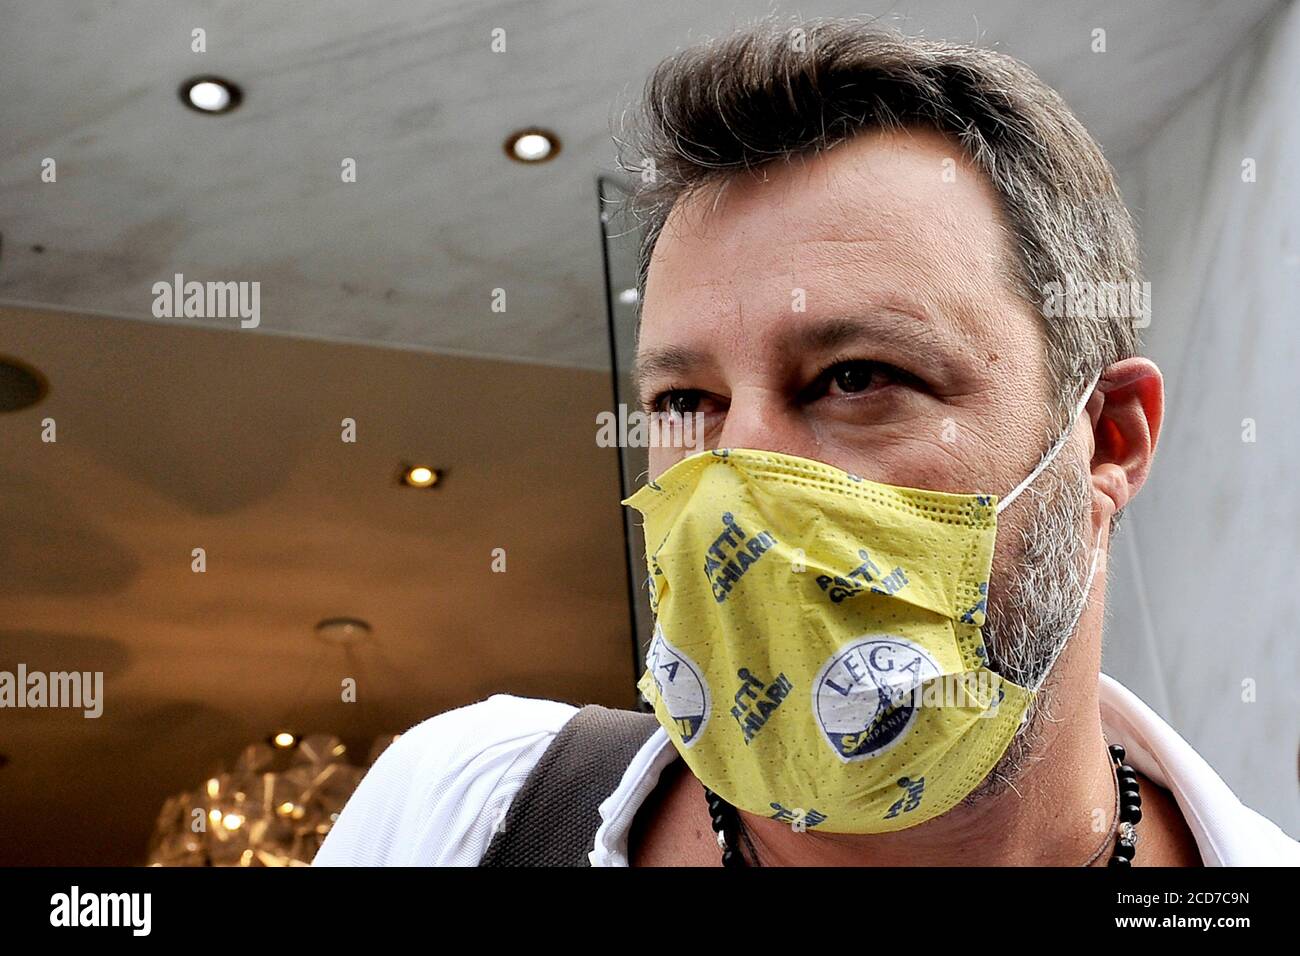 Caserta (CE), Campania, Italy 27th Aug 2020.  Minister Matteo Salvini during a short visit to the city of Caserta (CE), to meet his supporters before the regional elections to be held in mid-September. Credit: Vincenzo izzo / Alamy Live News Stock Photo